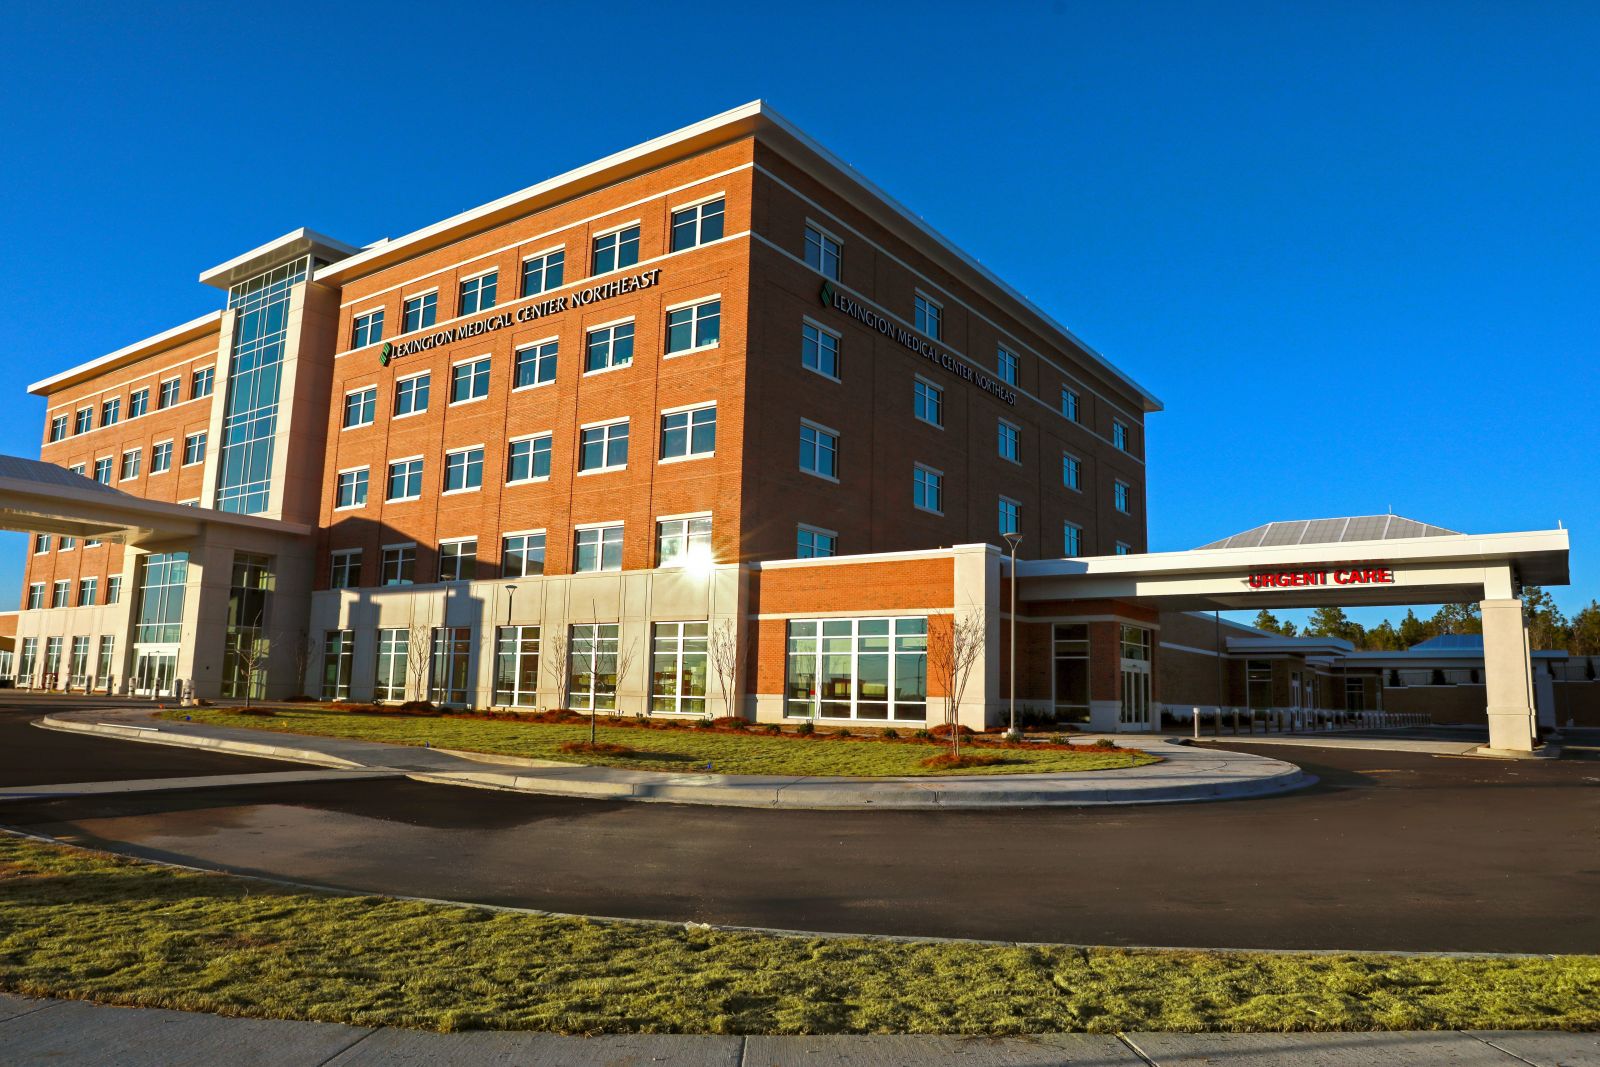 Lexington Medical Center is opening a new, 225,000-square-foot facility in Northeast Columbia on Tuesday. (Image/Provided)